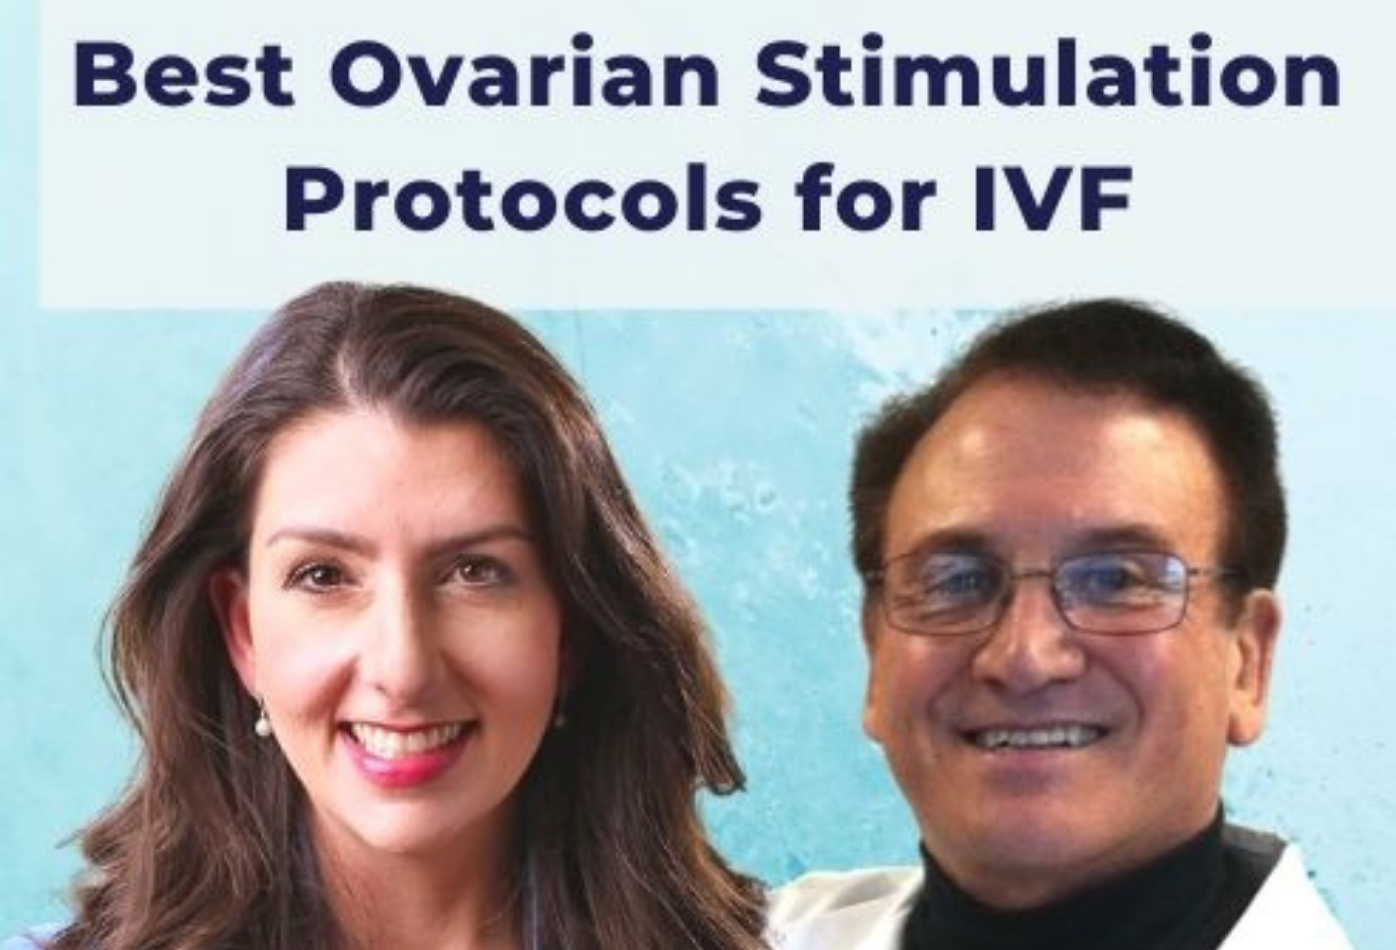 The Best Ovarian Stimulation Protocols for IVF episode with Dr. Sher